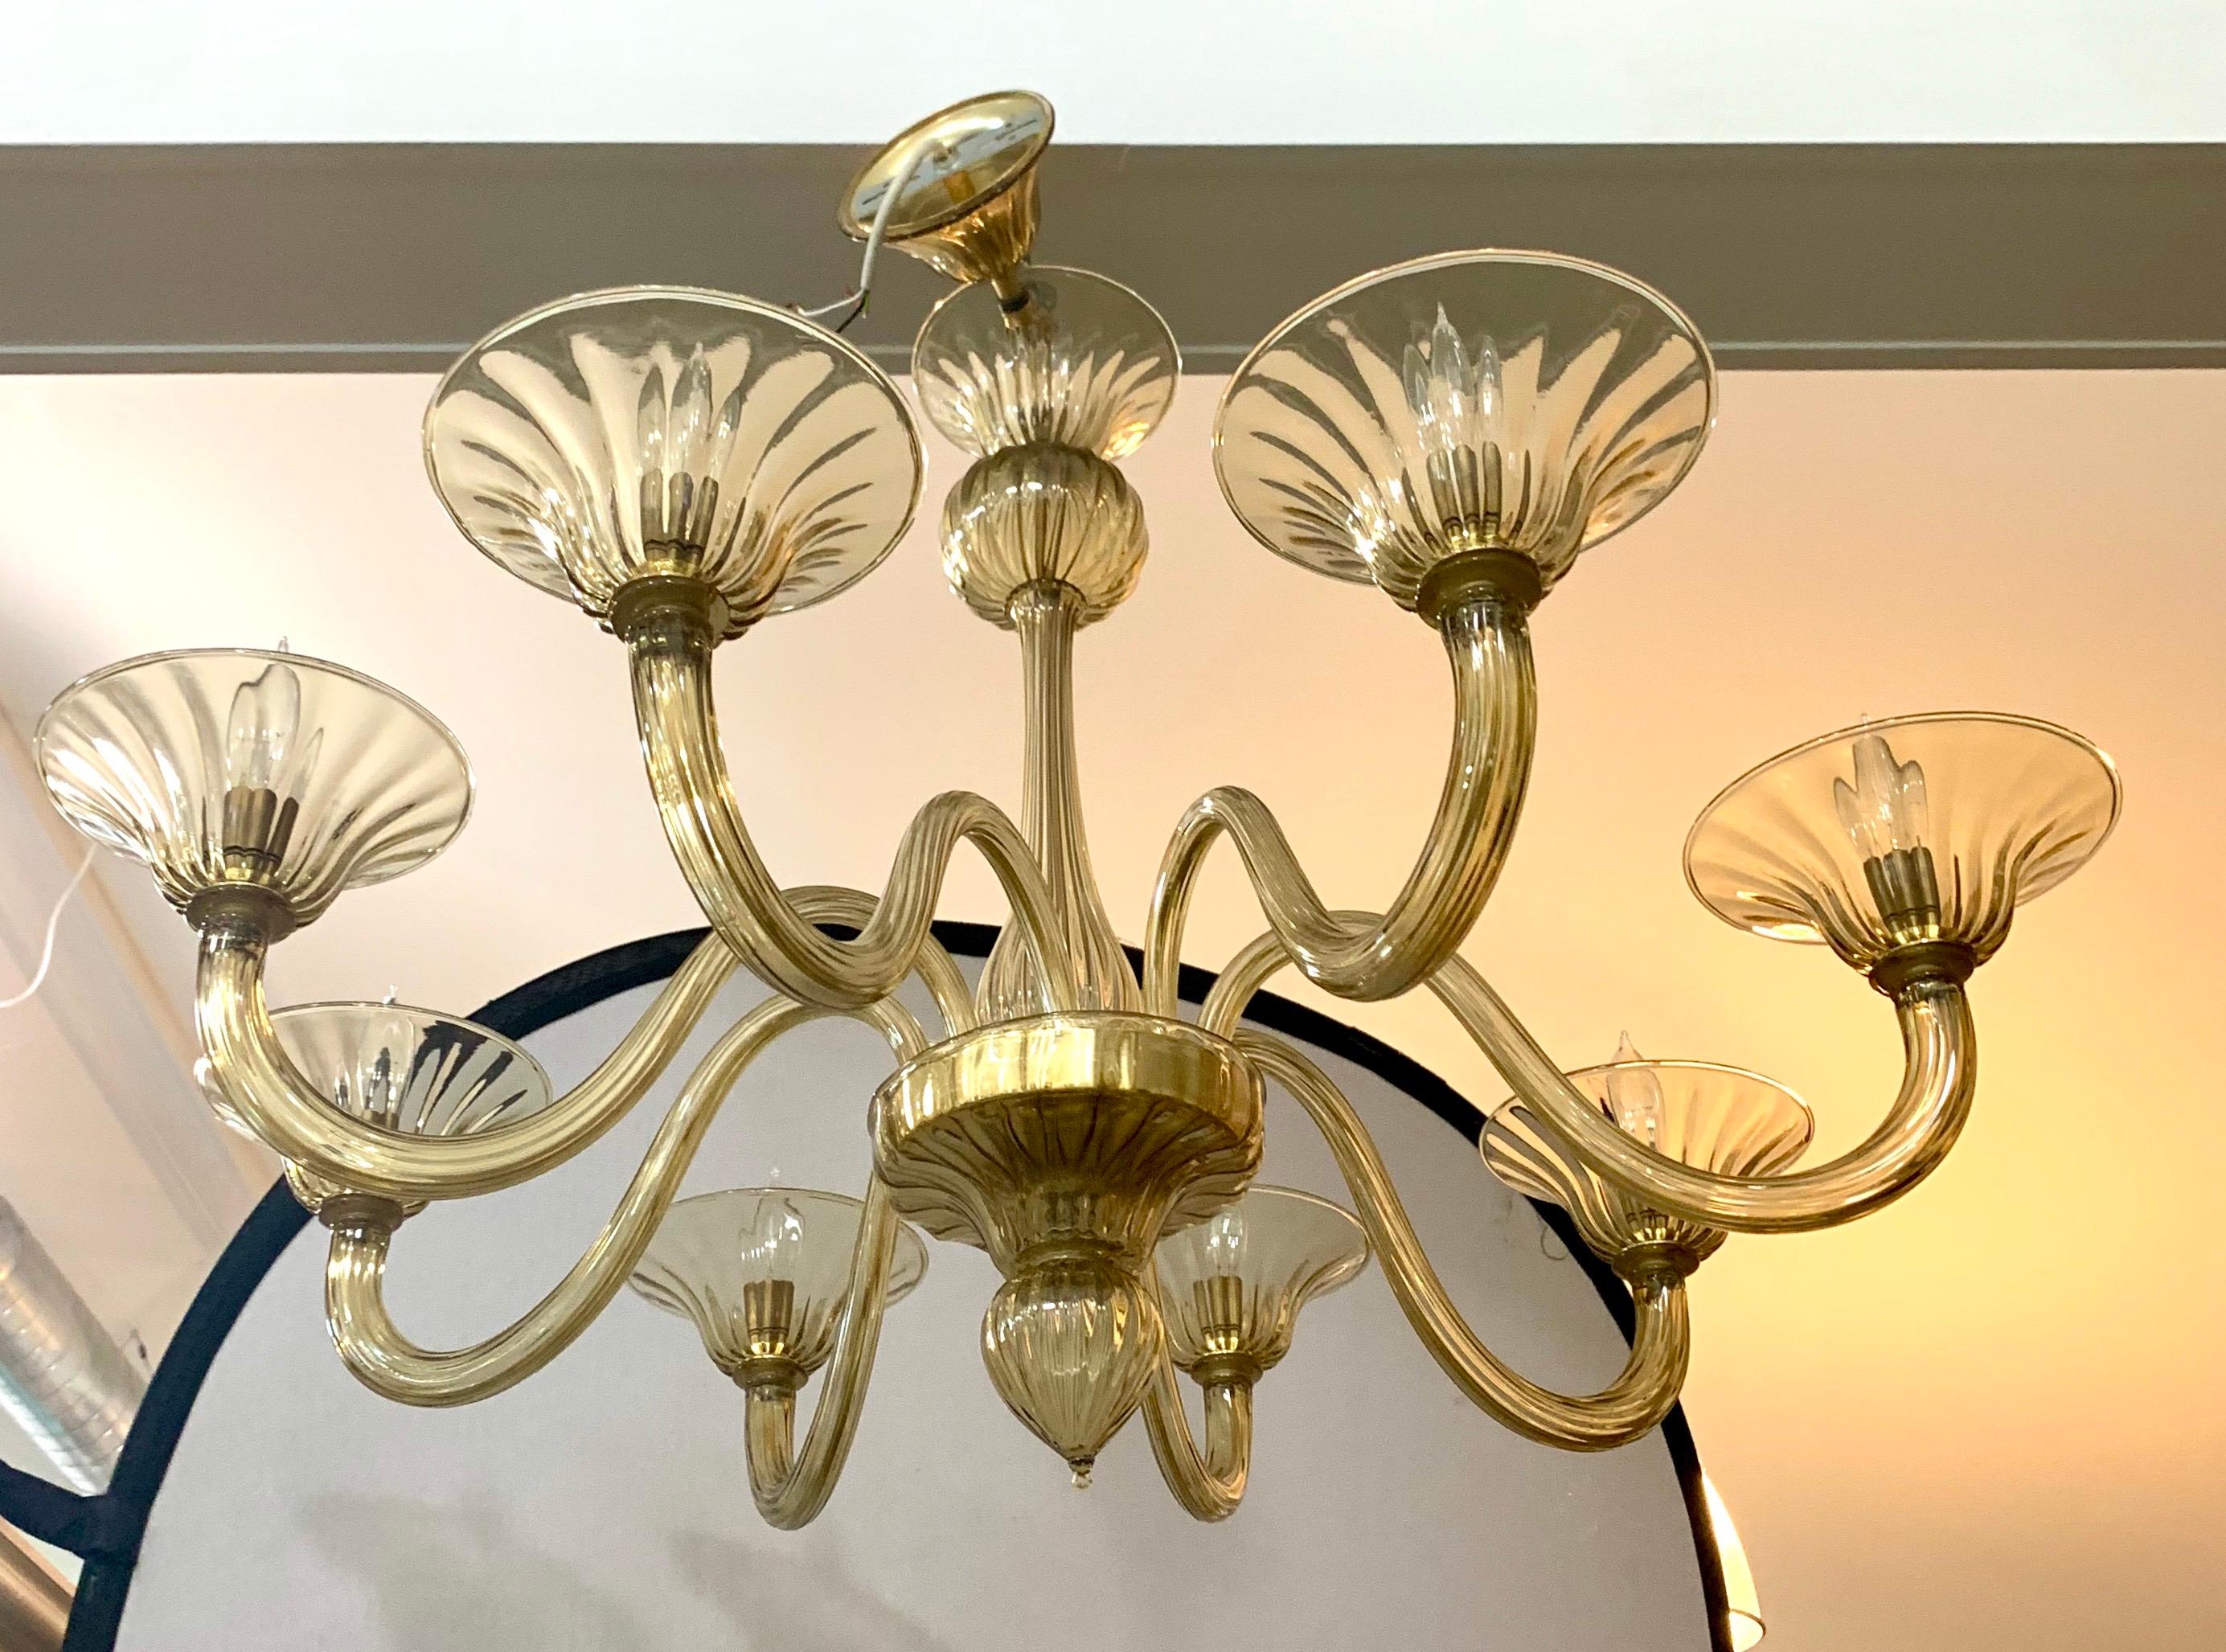 Stunning eight arm Murano glass chandelier done in gold tones. Made in Italy but wired for
USA and in perfect working order. Now, more than ever, home is where the heart is.